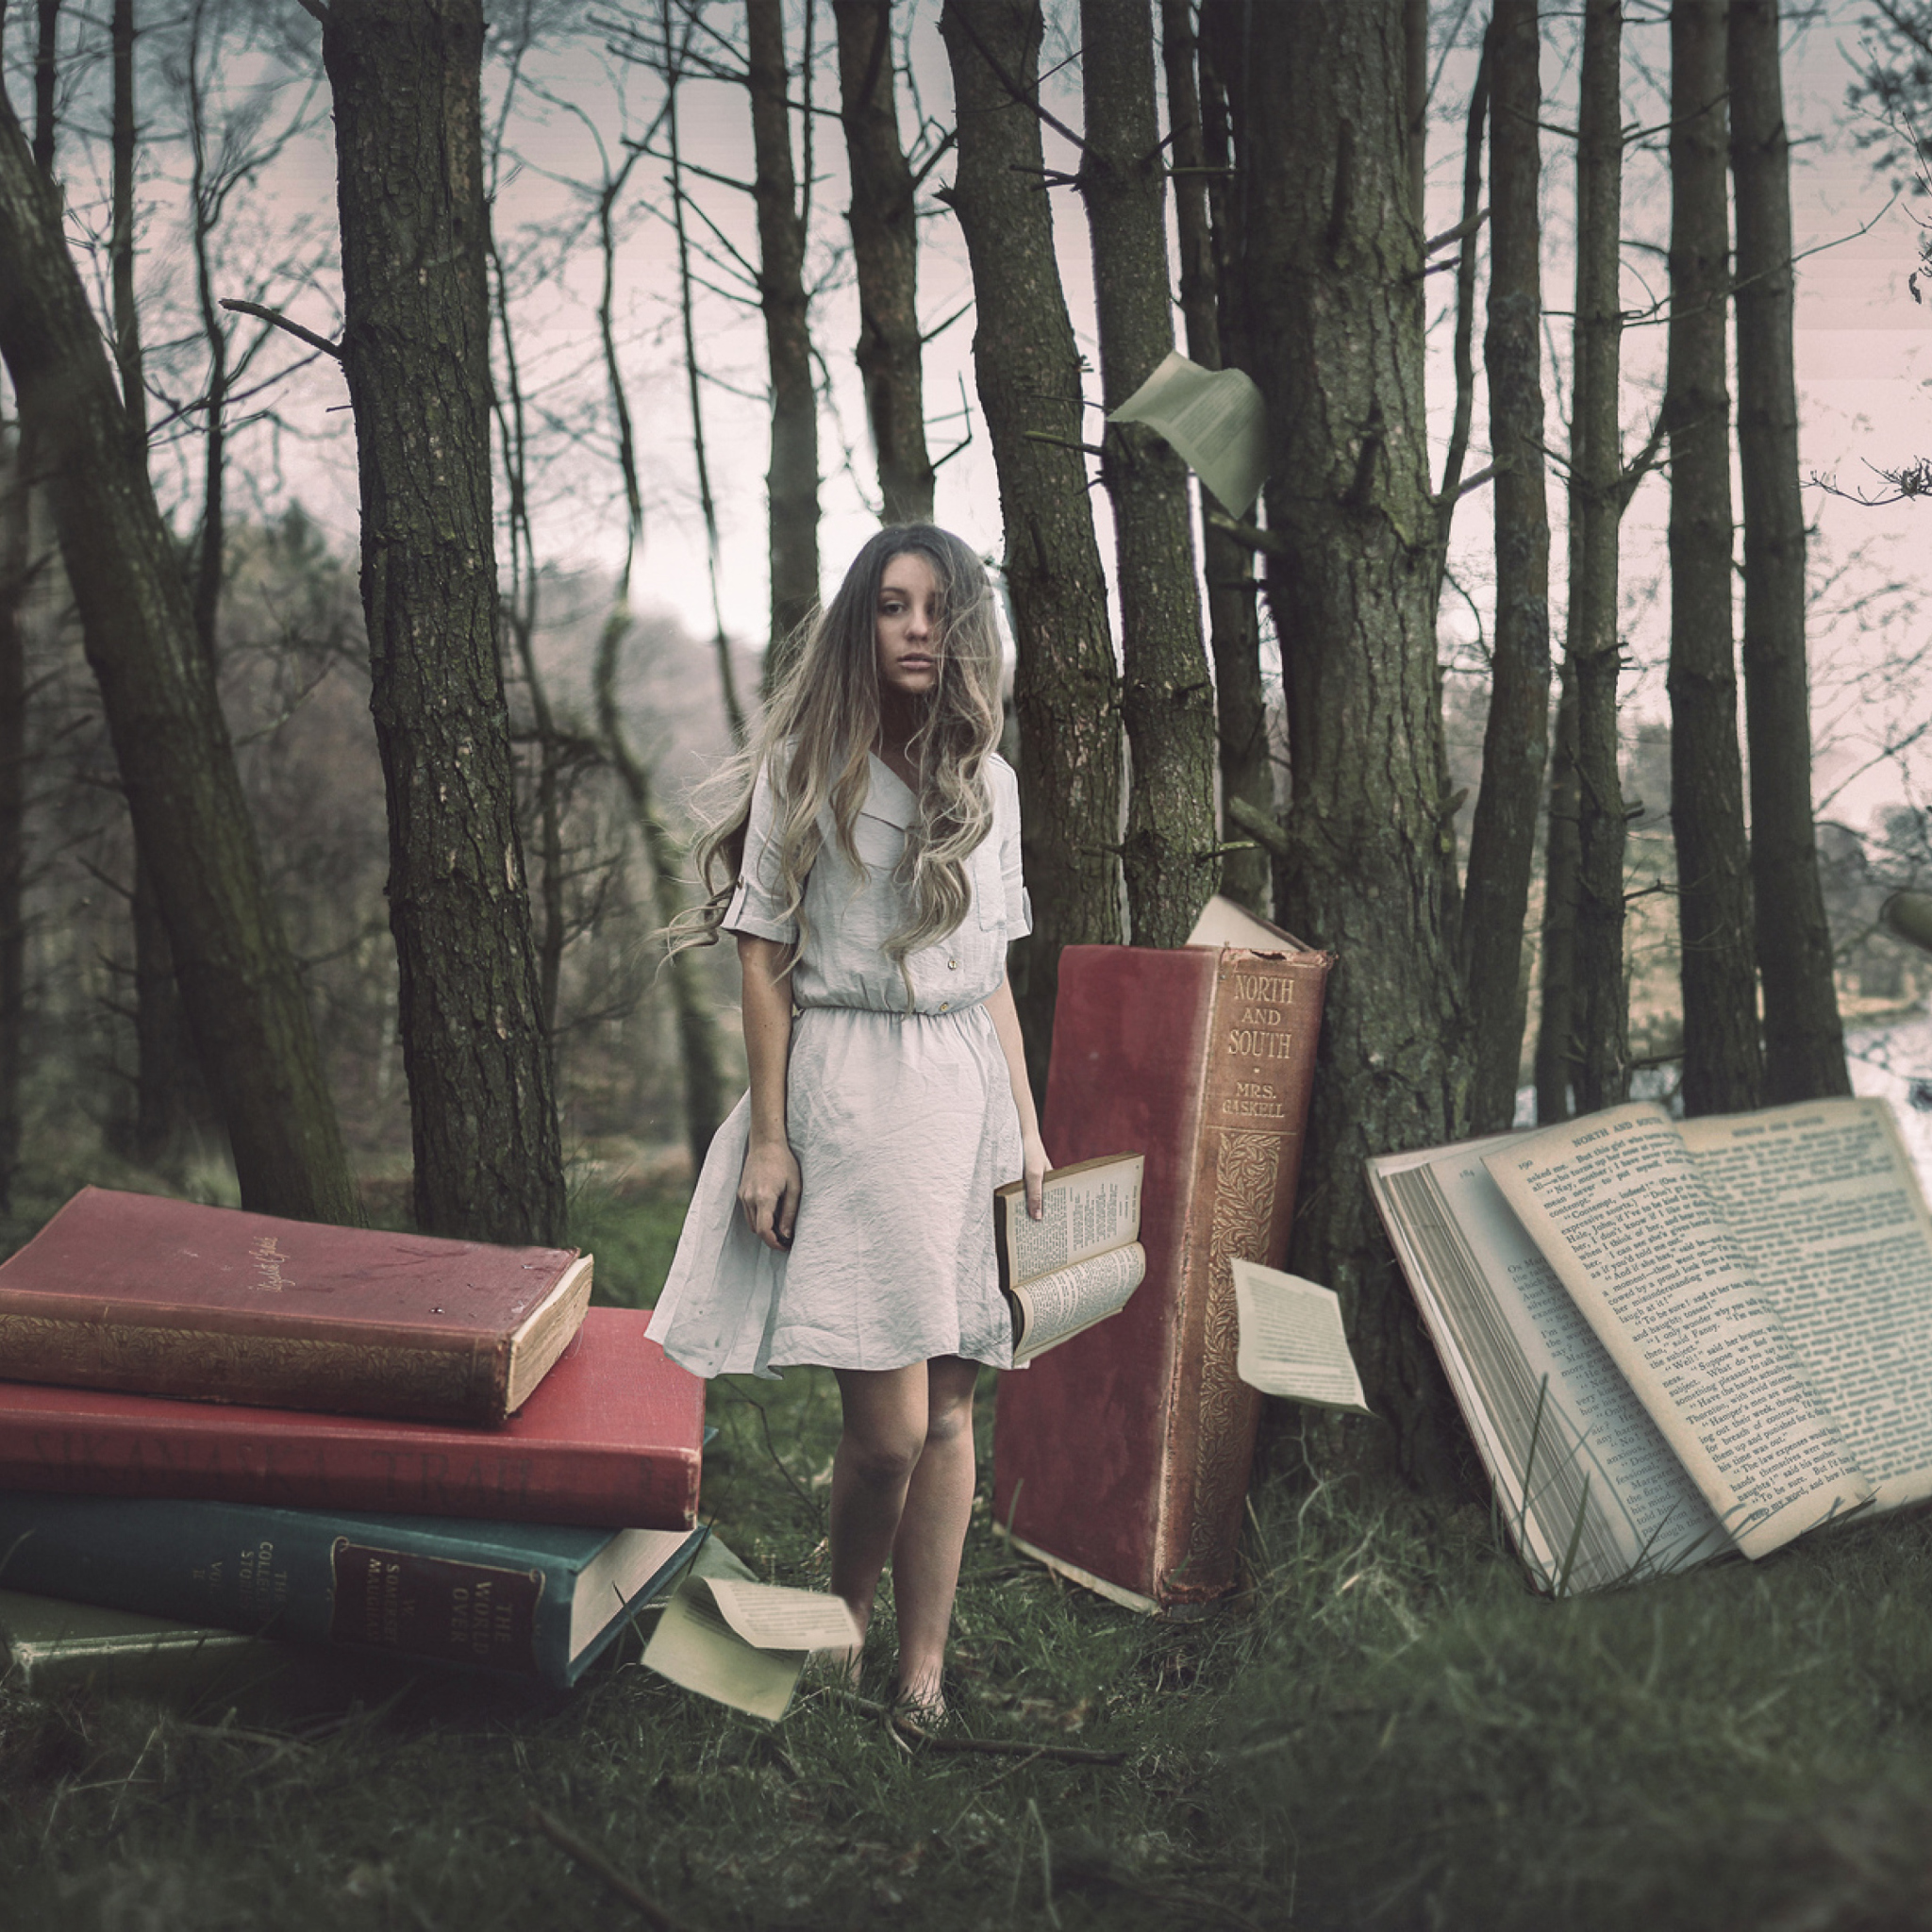 Sfondi Forest Nymph Surrounded By Books 2048x2048